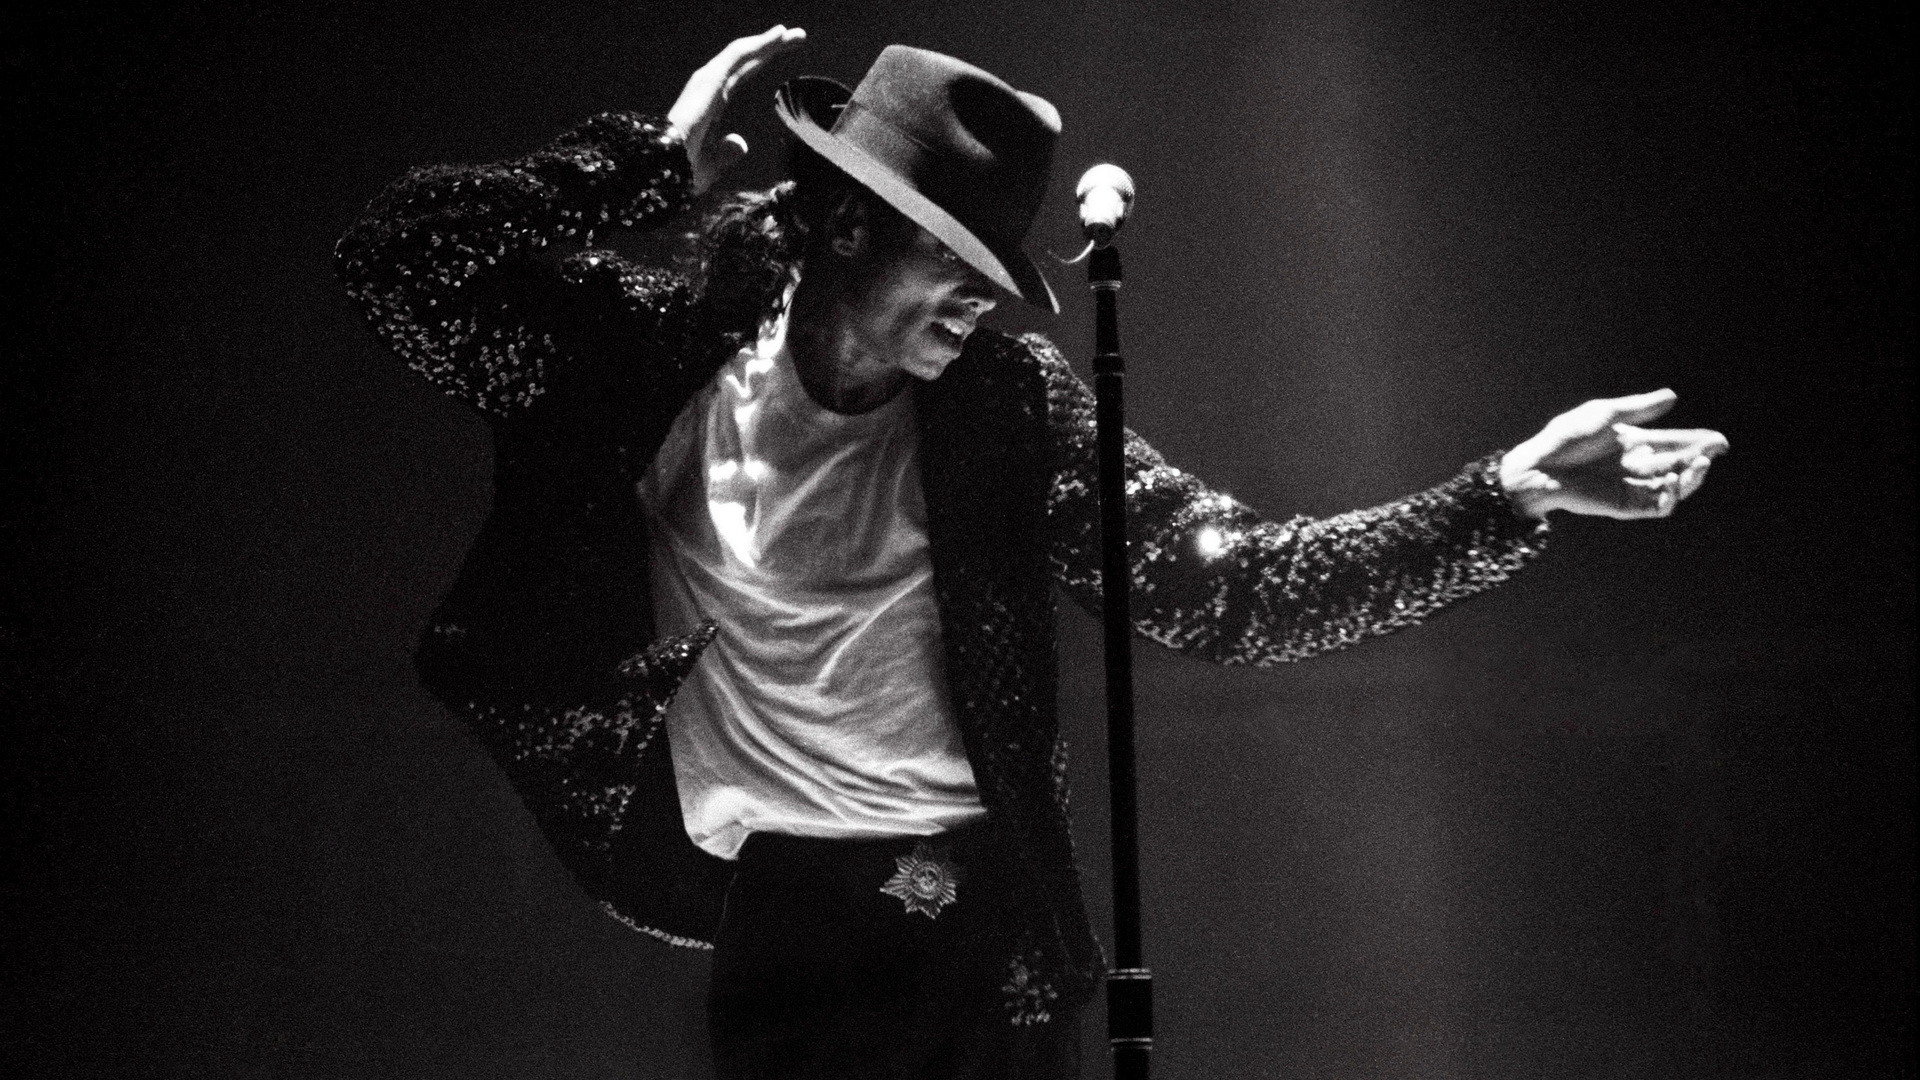 1920x1080 101 Michael Jackson HD Wallpapers | Backgrounds - Wallpaper Abyss - Page 2